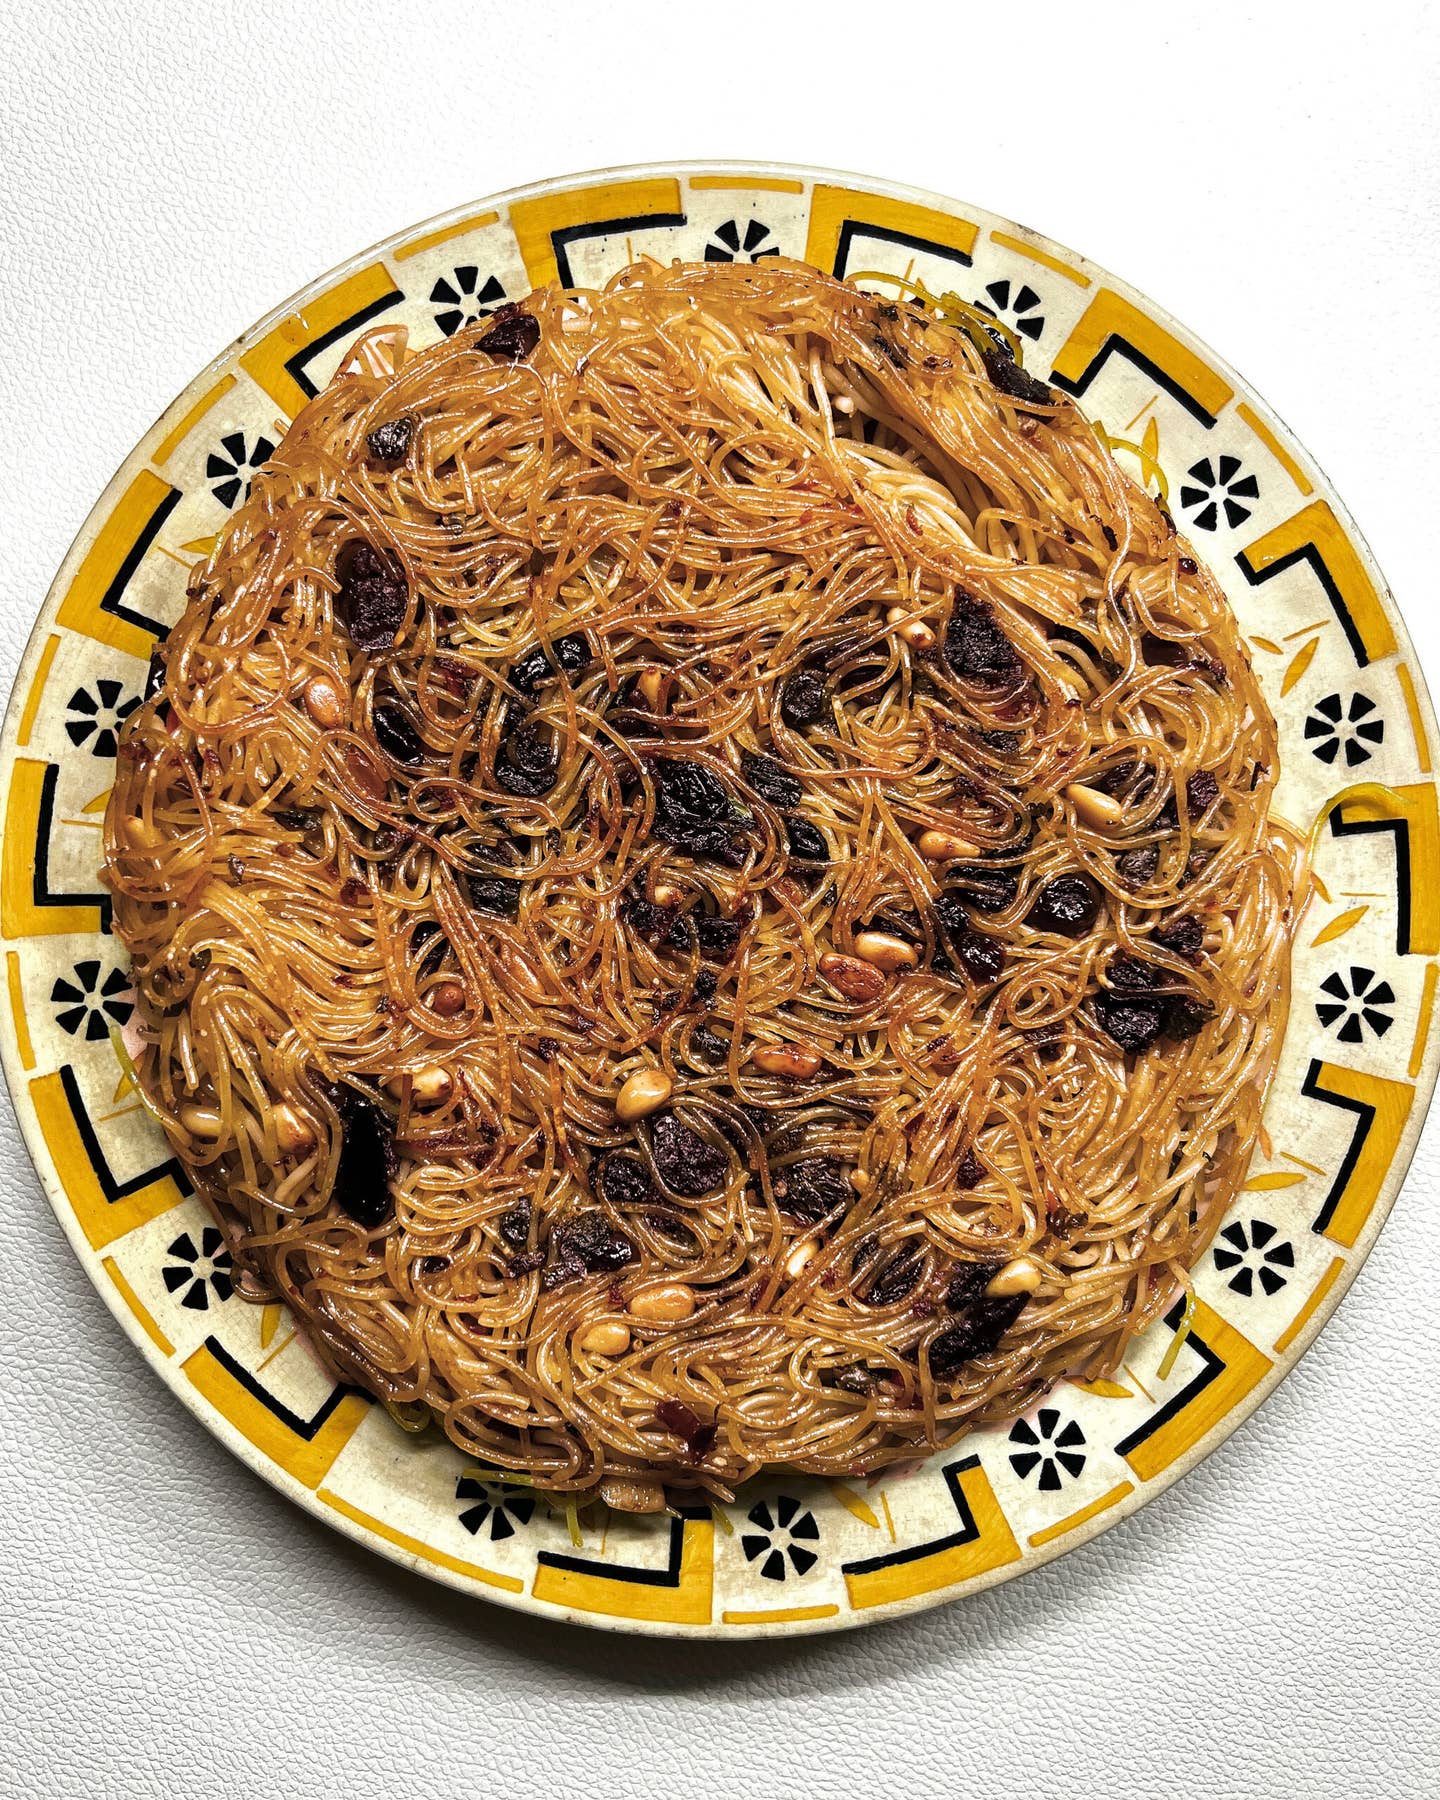 Eggless Pasta Frittata with Anchovies, Raisins, and Pine Nuts